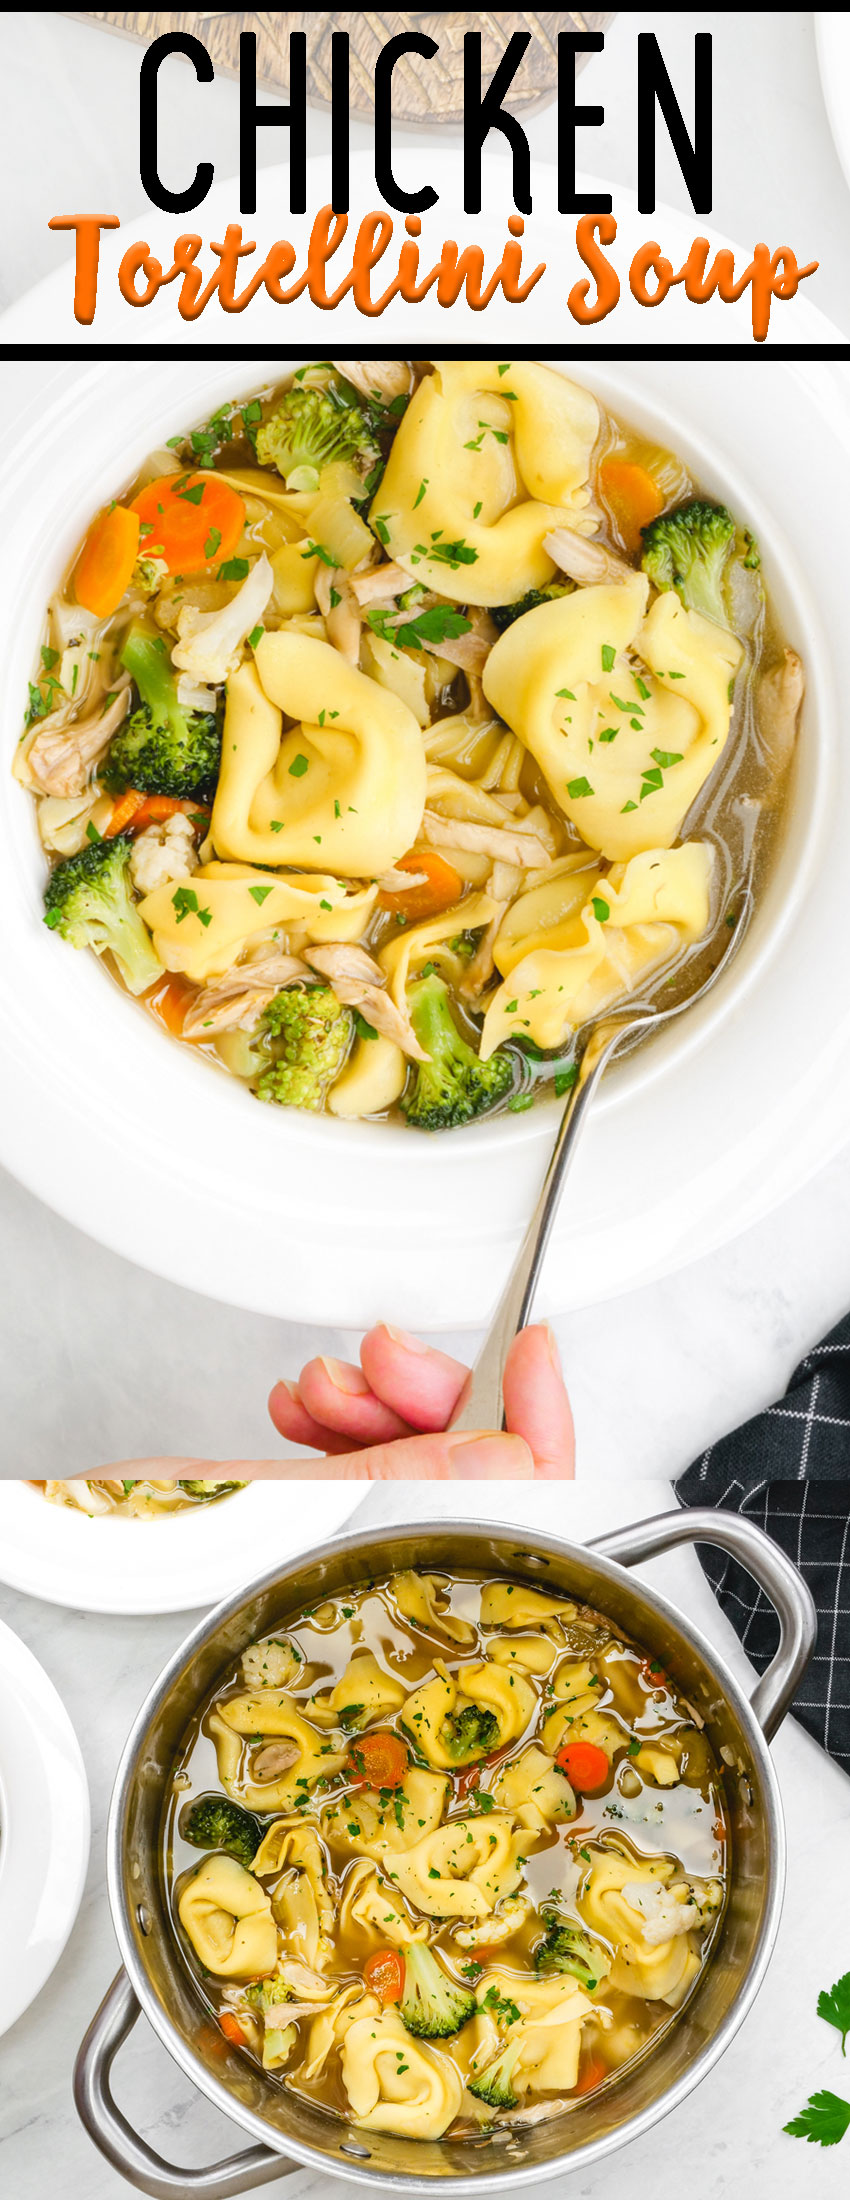 Delicious comfort food, this chicken tortellini soup is loaded with veggies and cheesy tortellini!